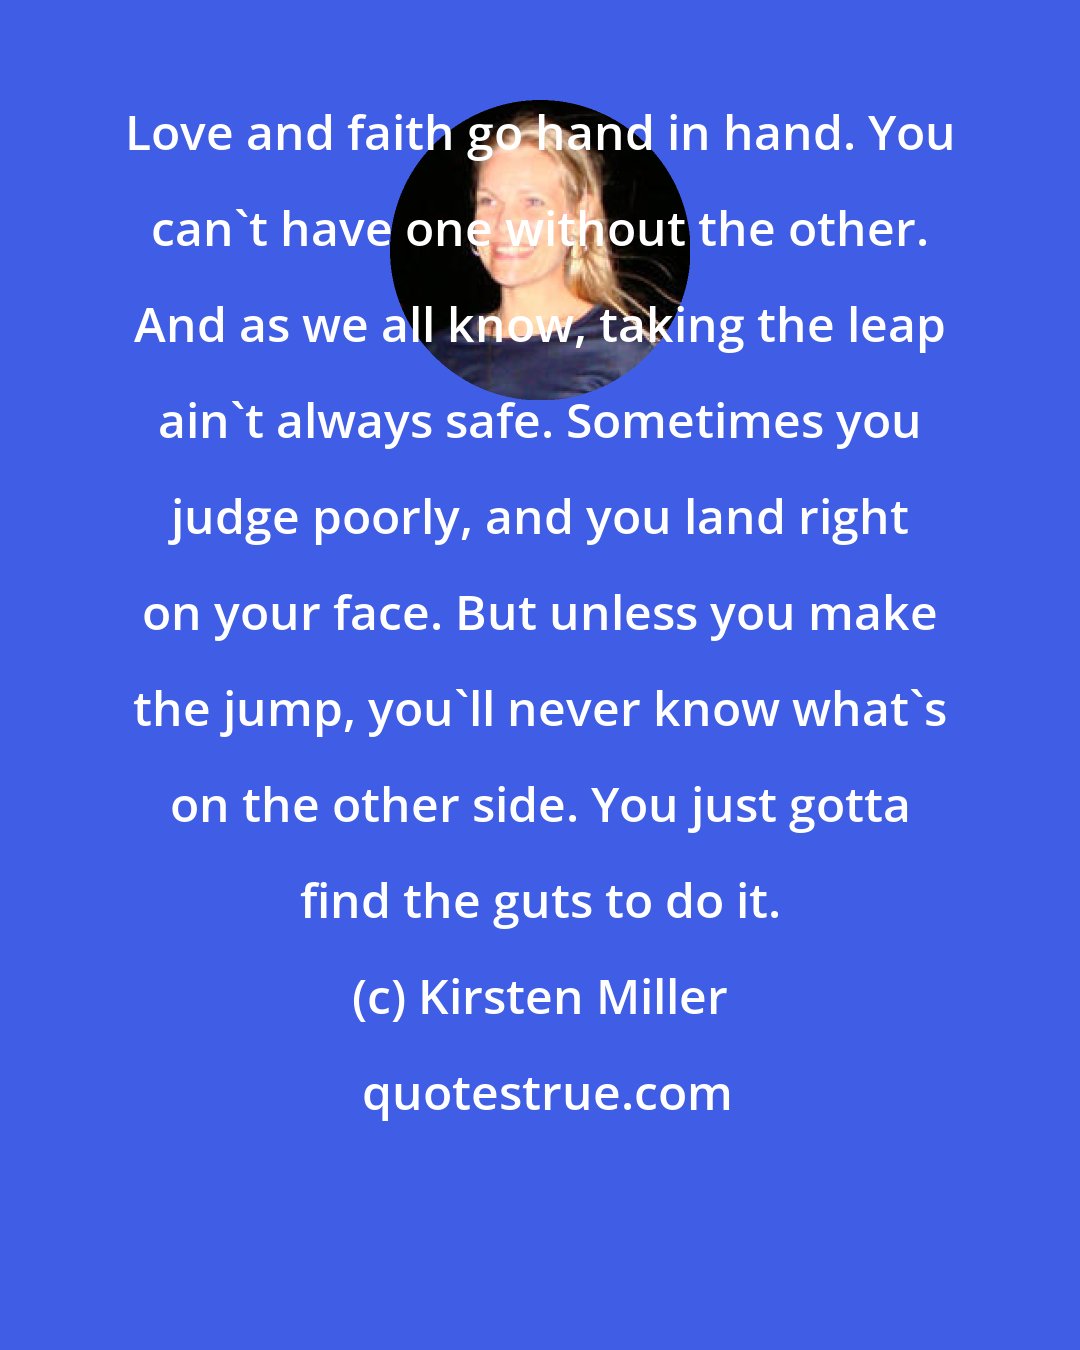 Kirsten Miller: Love and faith go hand in hand. You can't have one without the other. And as we all know, taking the leap ain't always safe. Sometimes you judge poorly, and you land right on your face. But unless you make the jump, you'll never know what's on the other side. You just gotta find the guts to do it.